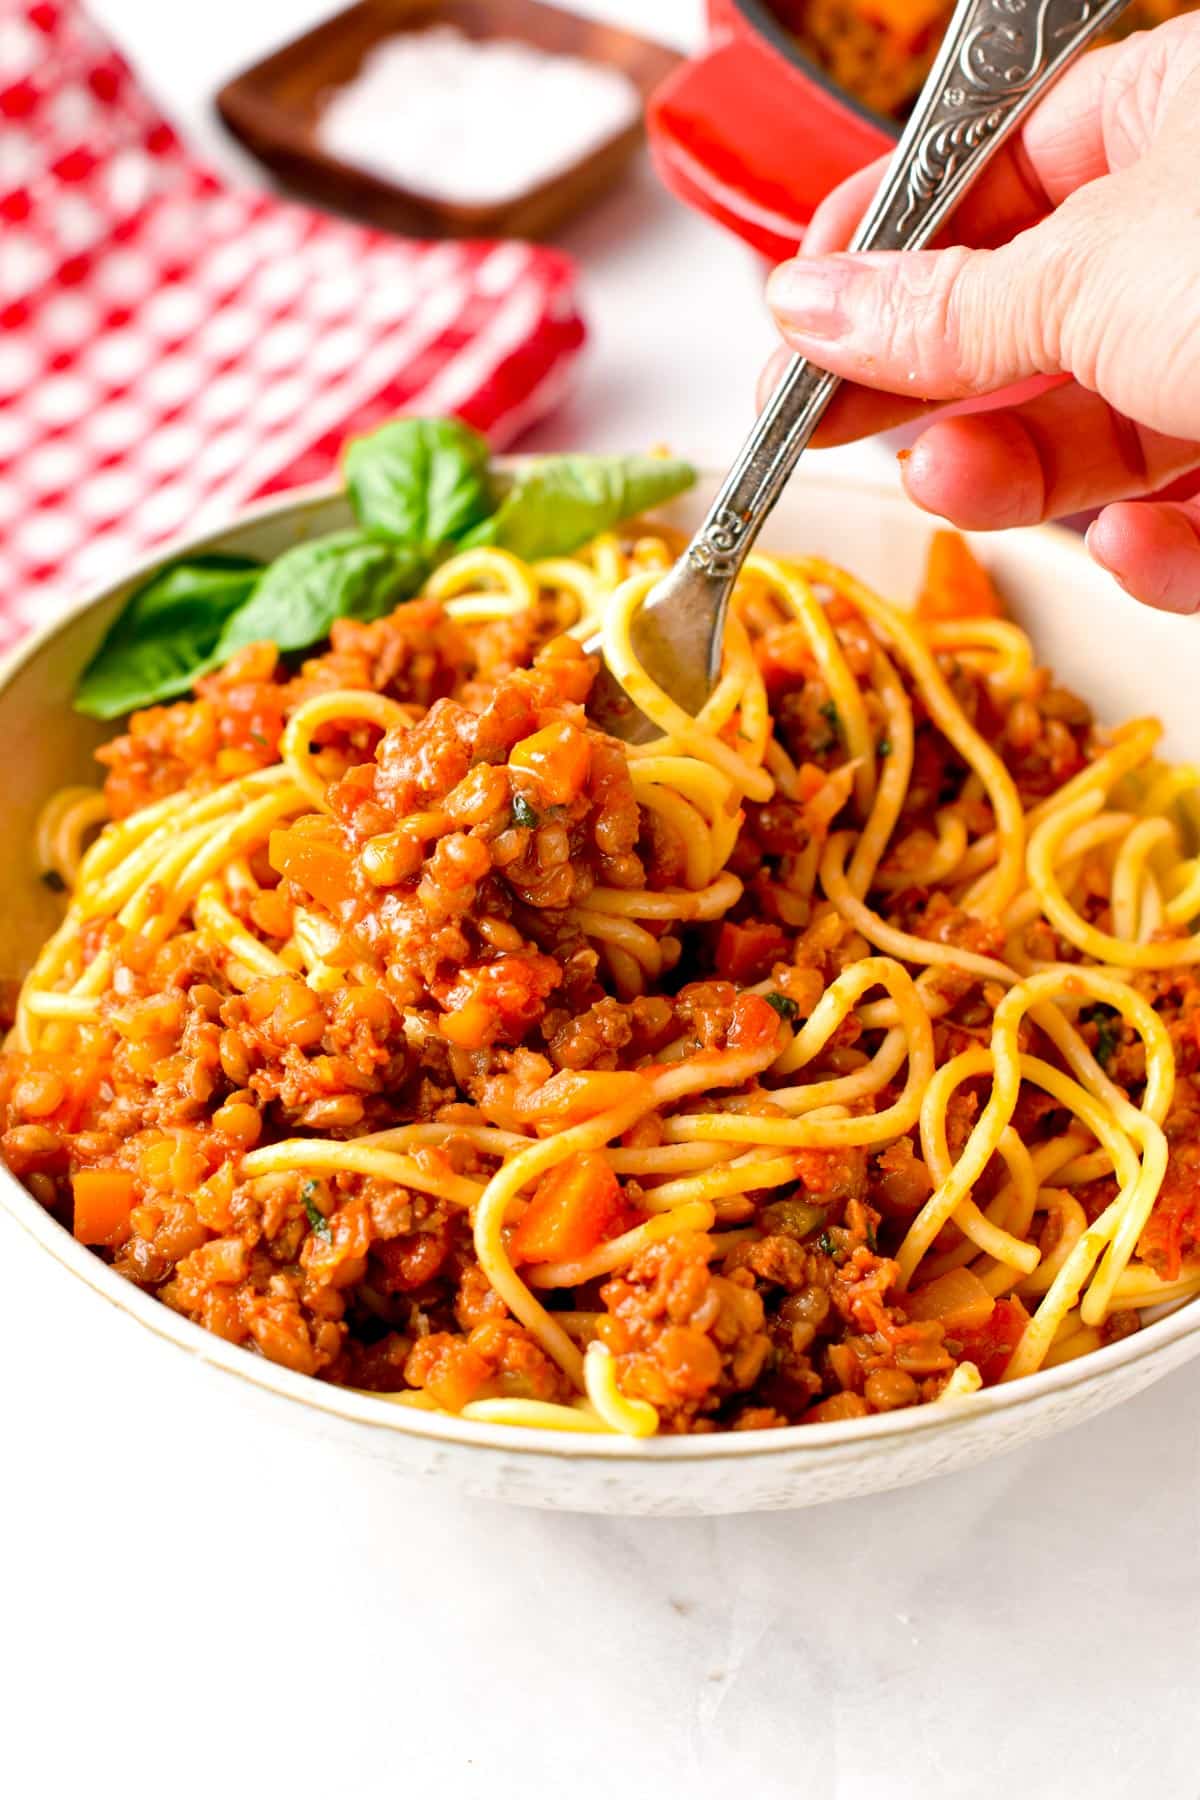 This vegan bolognese recipe is an easy healthy vegan dinner packed with the most delicious Italian flavors and more than 9 plants! If you are looking to add more plants to your plate, this lentil bolognese recipe is a must.